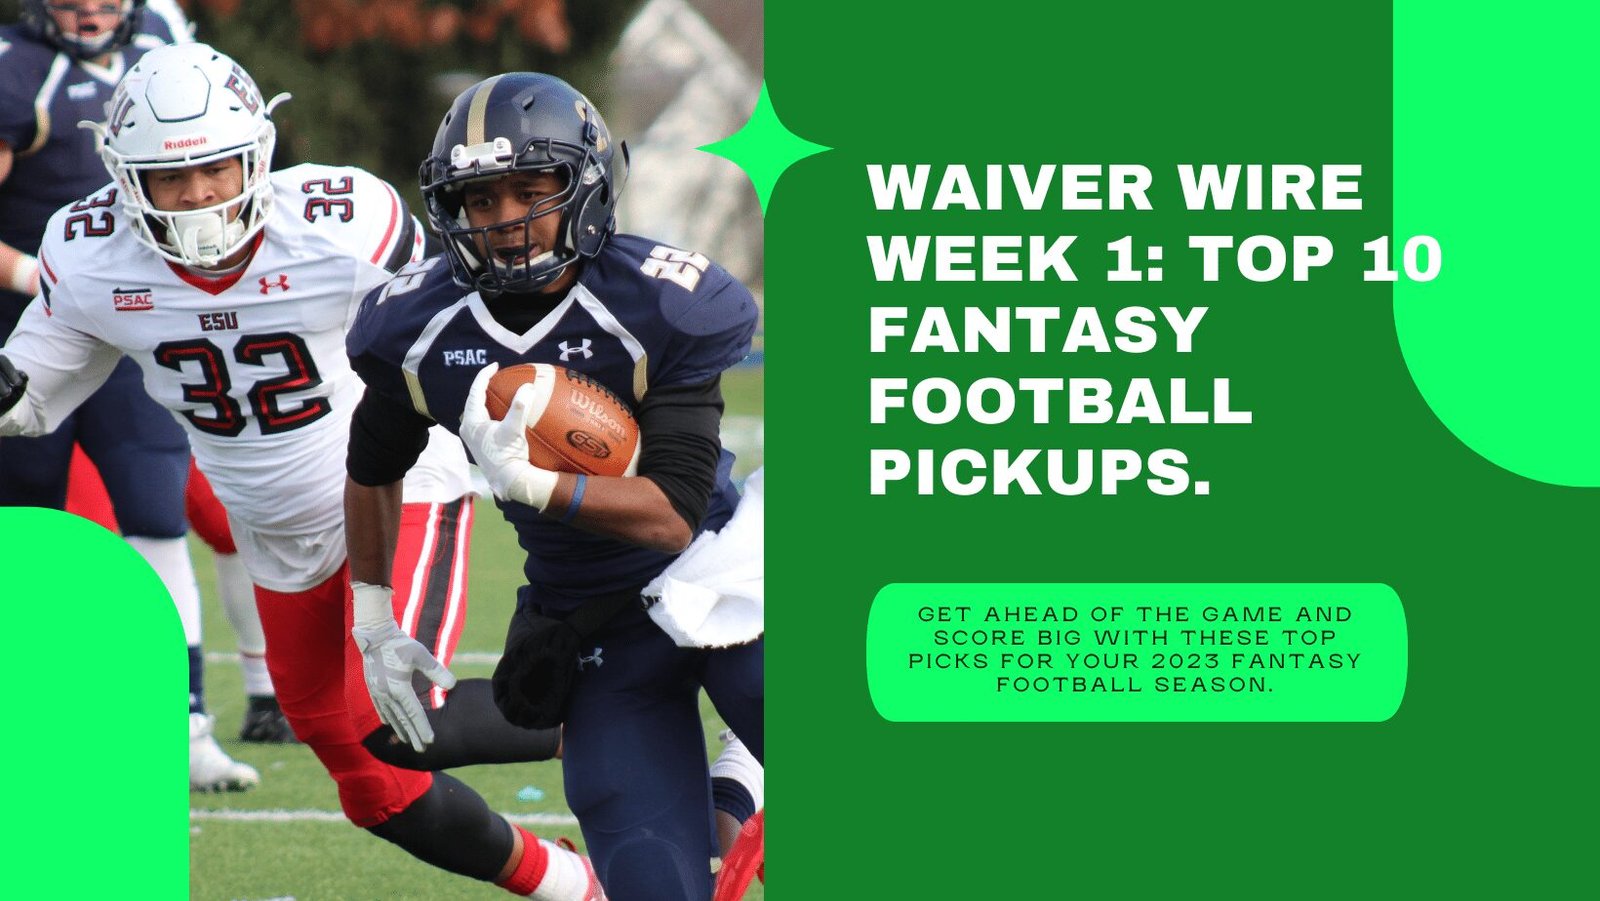 Waiver Wire Week 1 Top 10 Fantasy Football Pickups for 2023